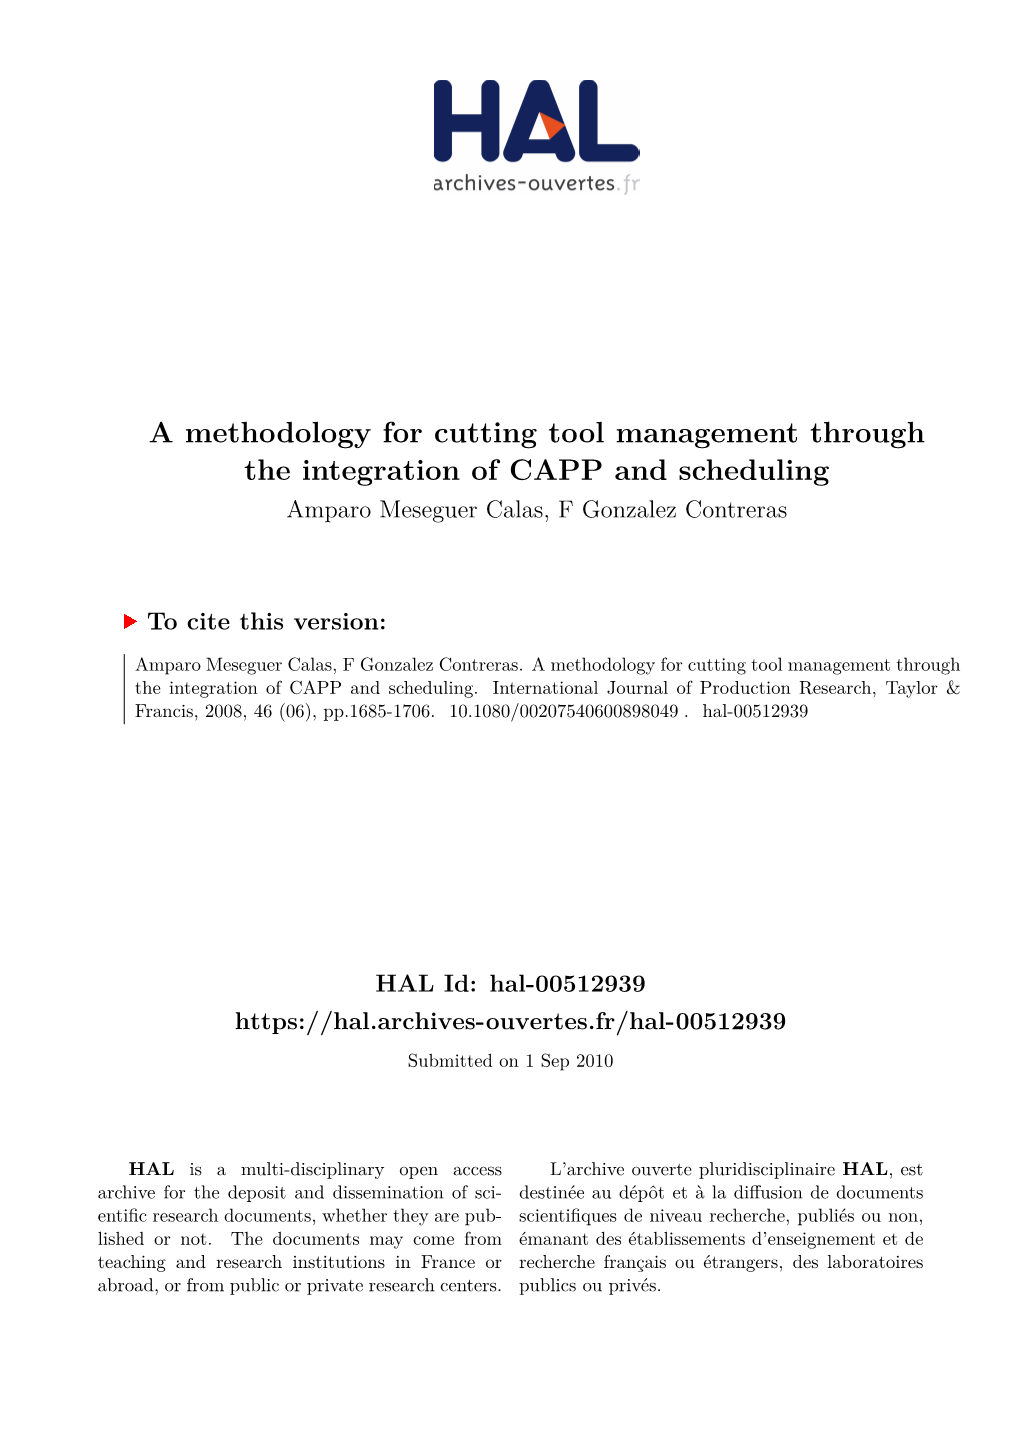 A Methodology for Cutting Tool Management Through the Integration of CAPP and Scheduling Amparo Meseguer Calas, F Gonzalez Contreras